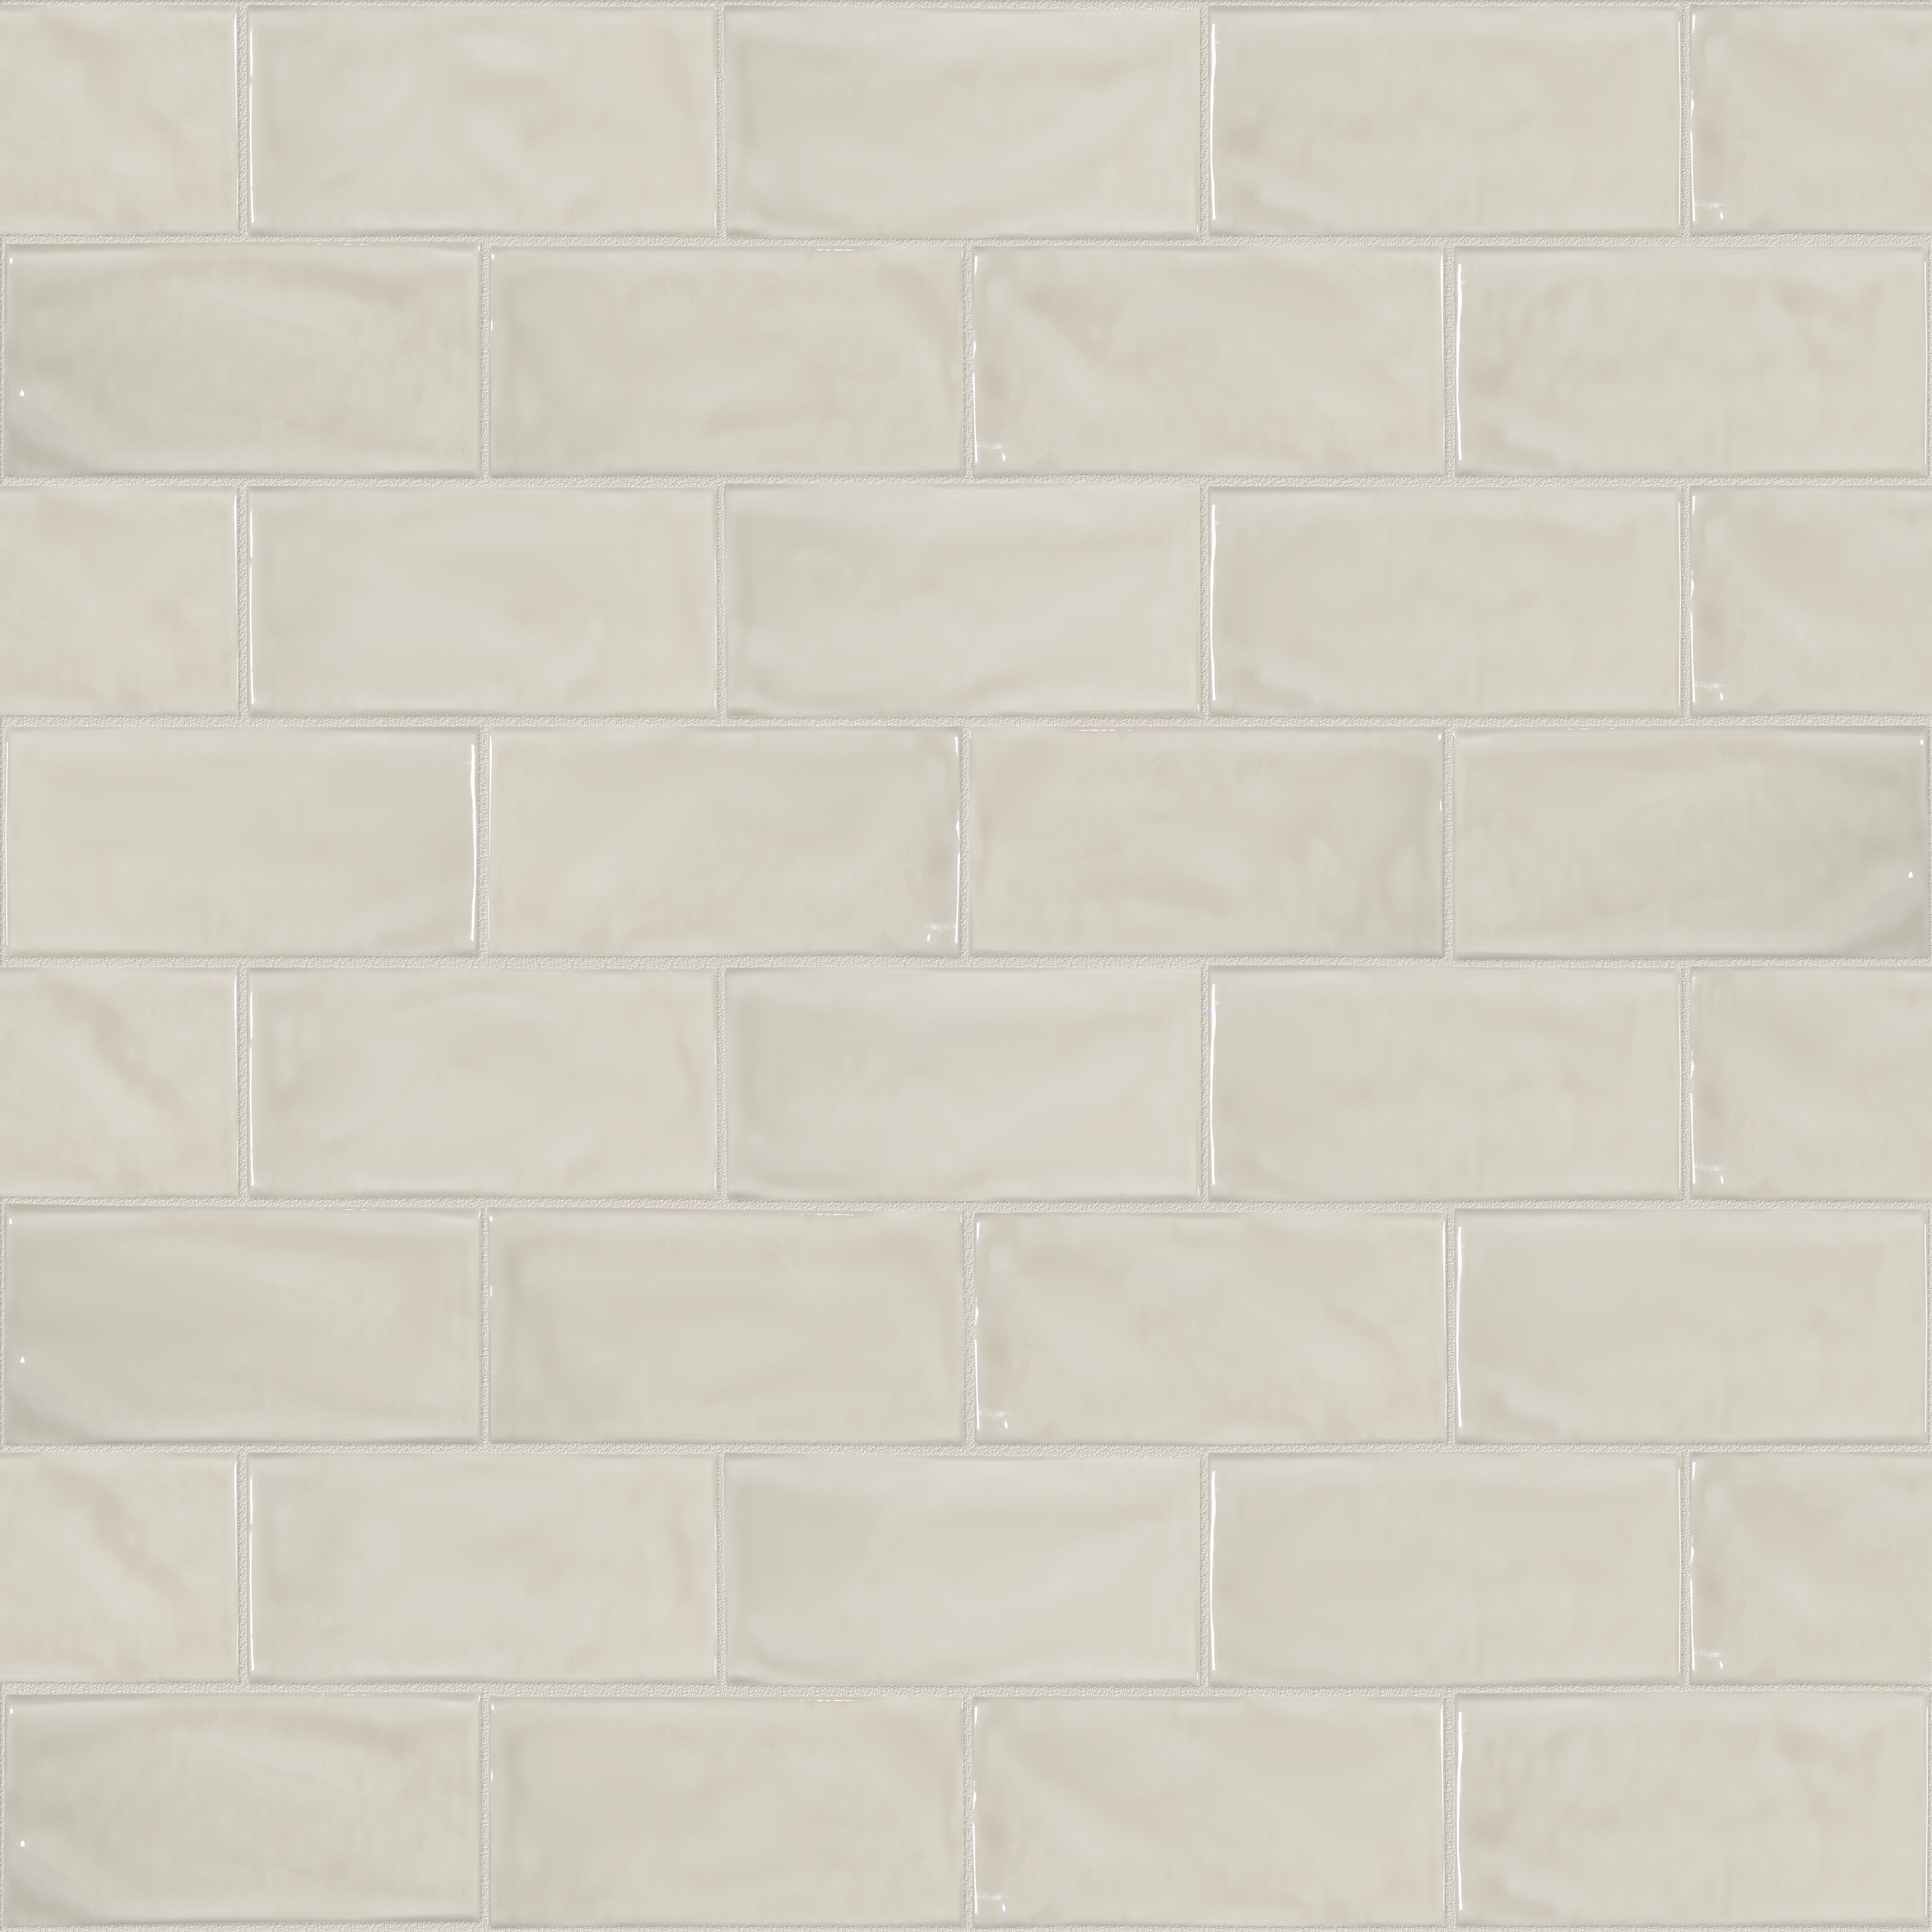 desert pattern glazed ceramic field tile from marlow anatolia collection distributed by surface group international glossy finish pressed edge 3x6 rectangle shape